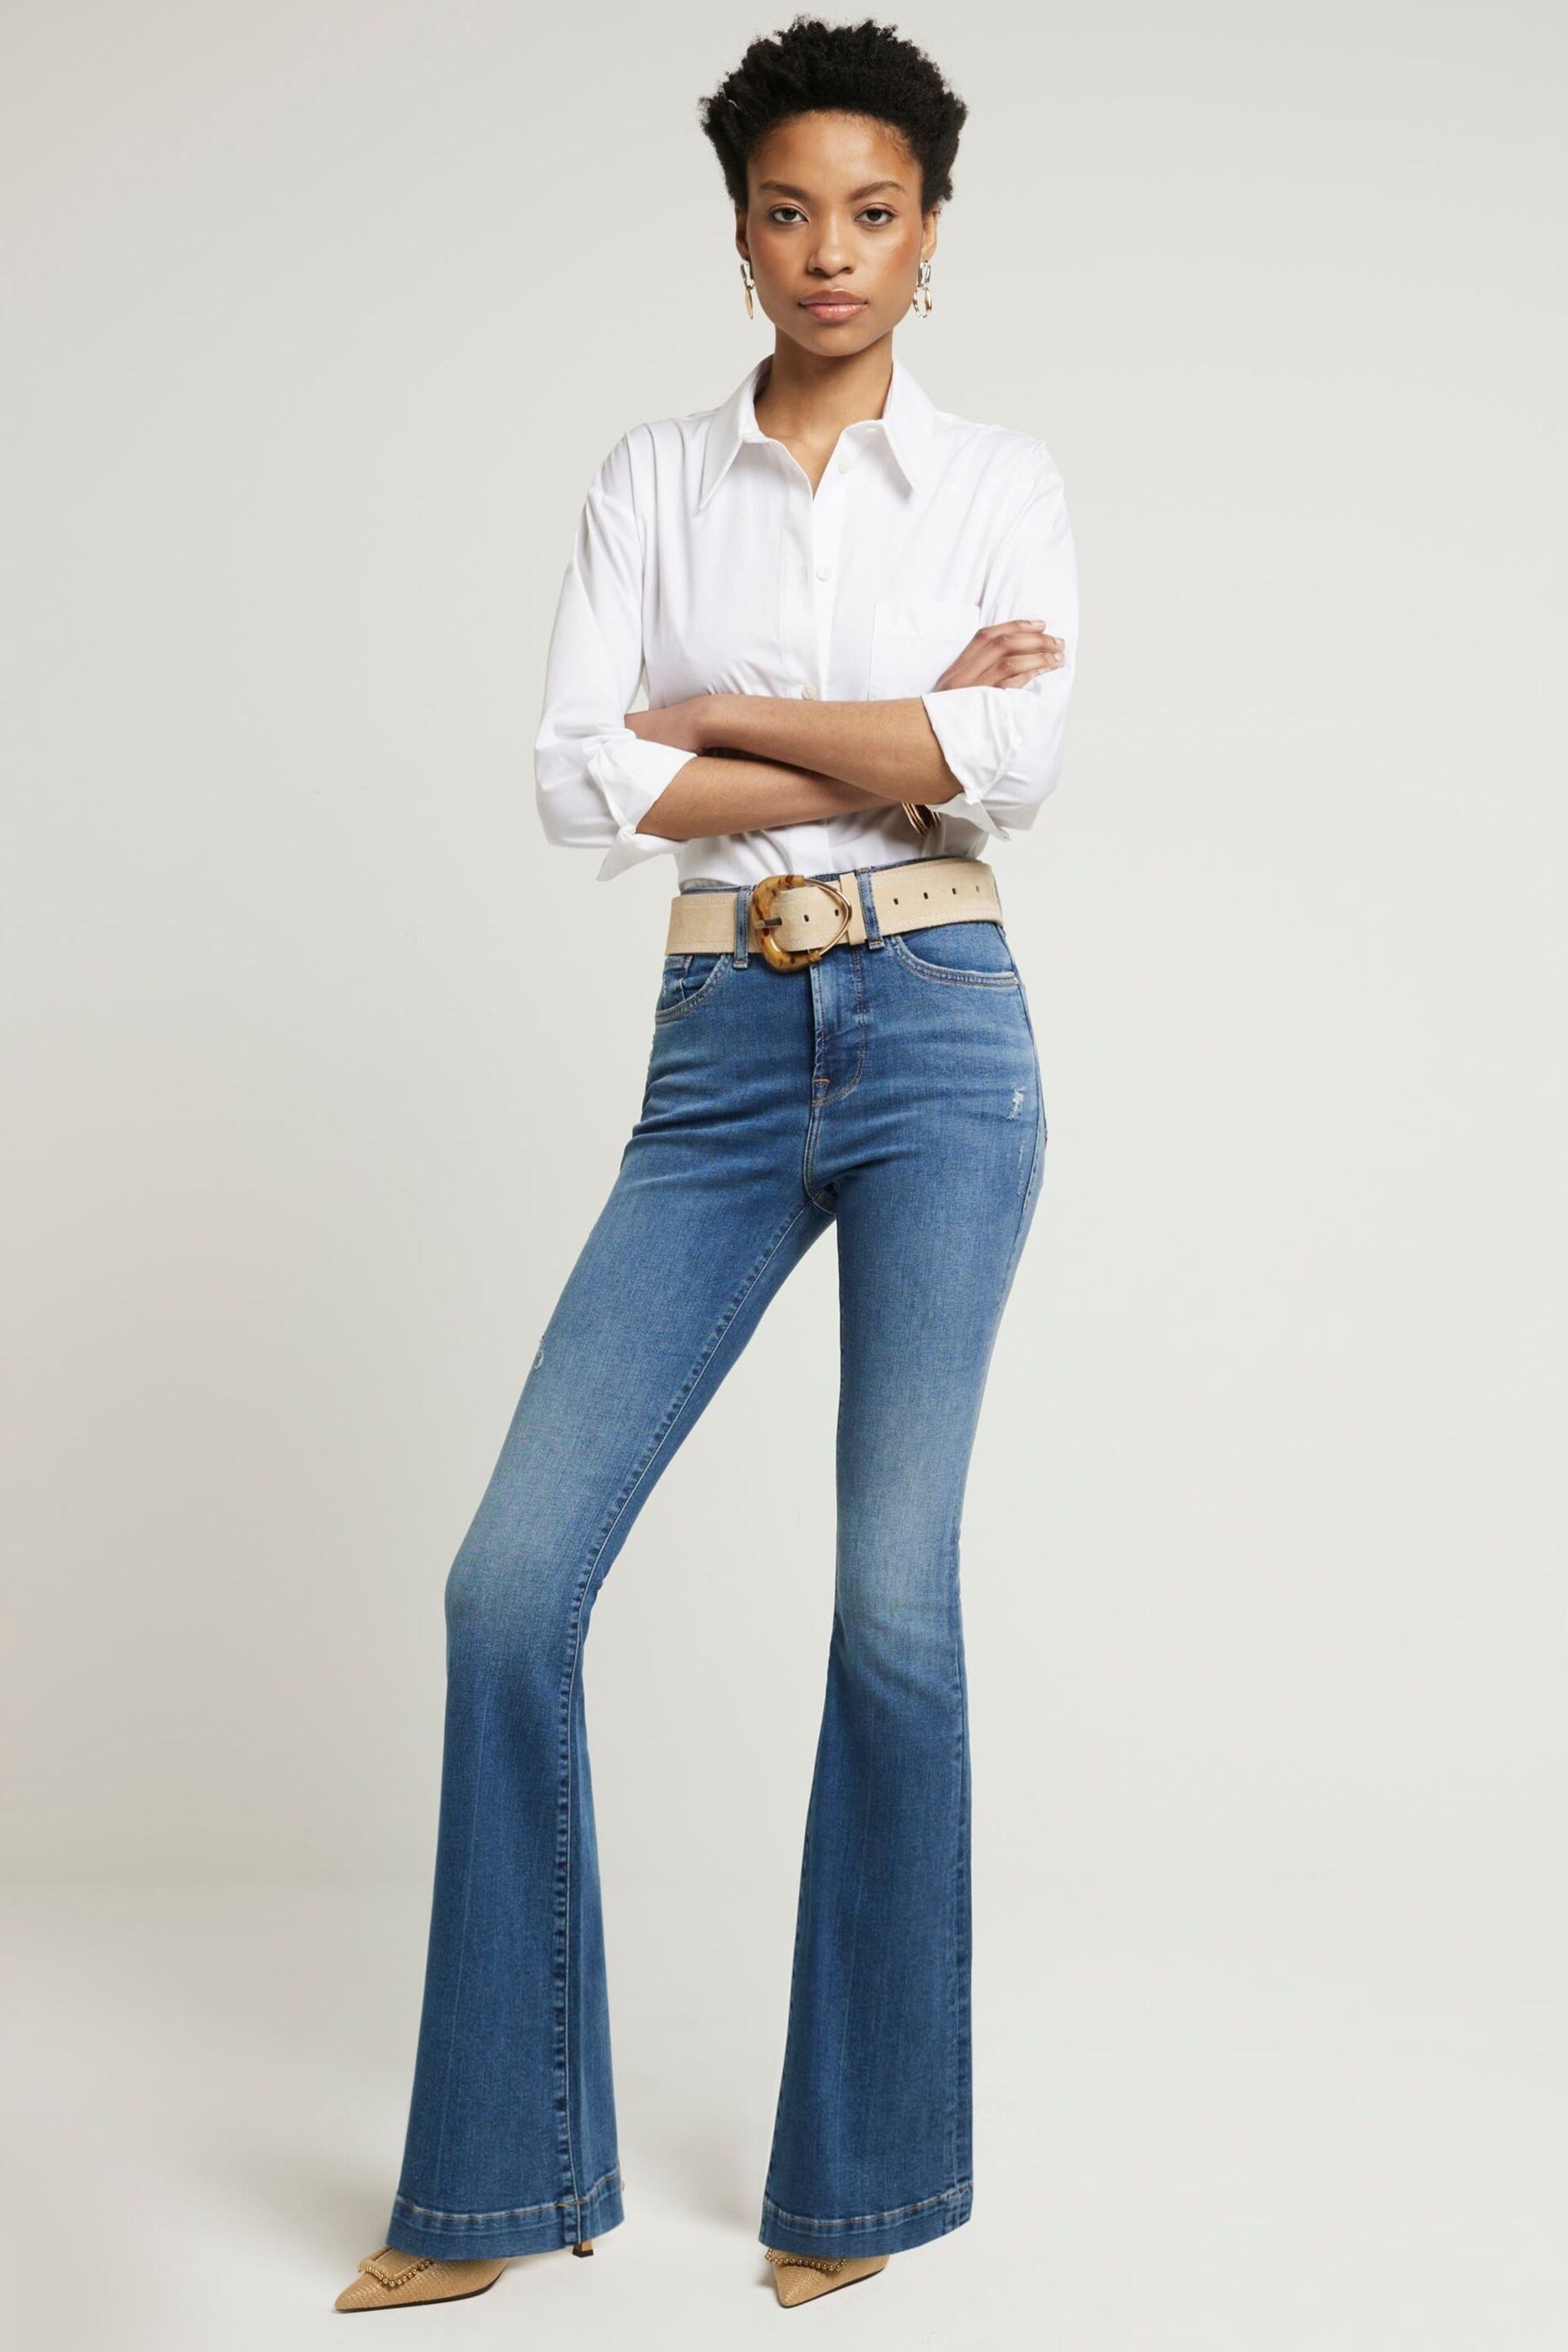 River Island Blue High Rise Tummy Hold Flare Jeans - Image 1 of 5